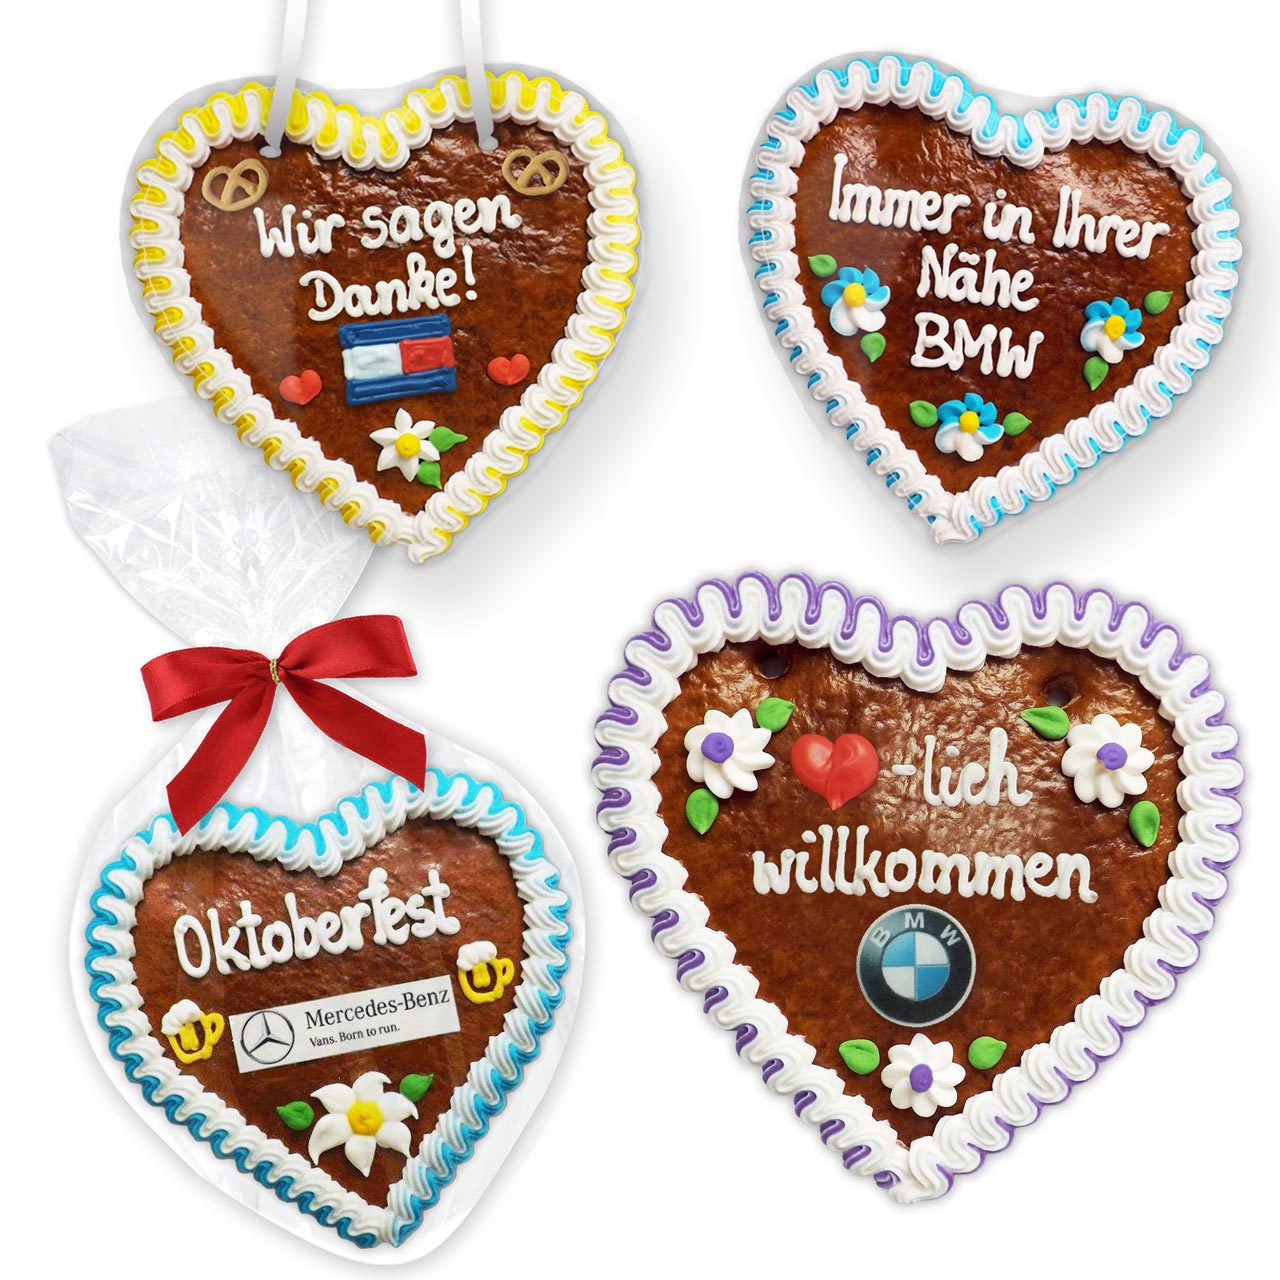 Gingerbread heart 18cm optional with your logo and text